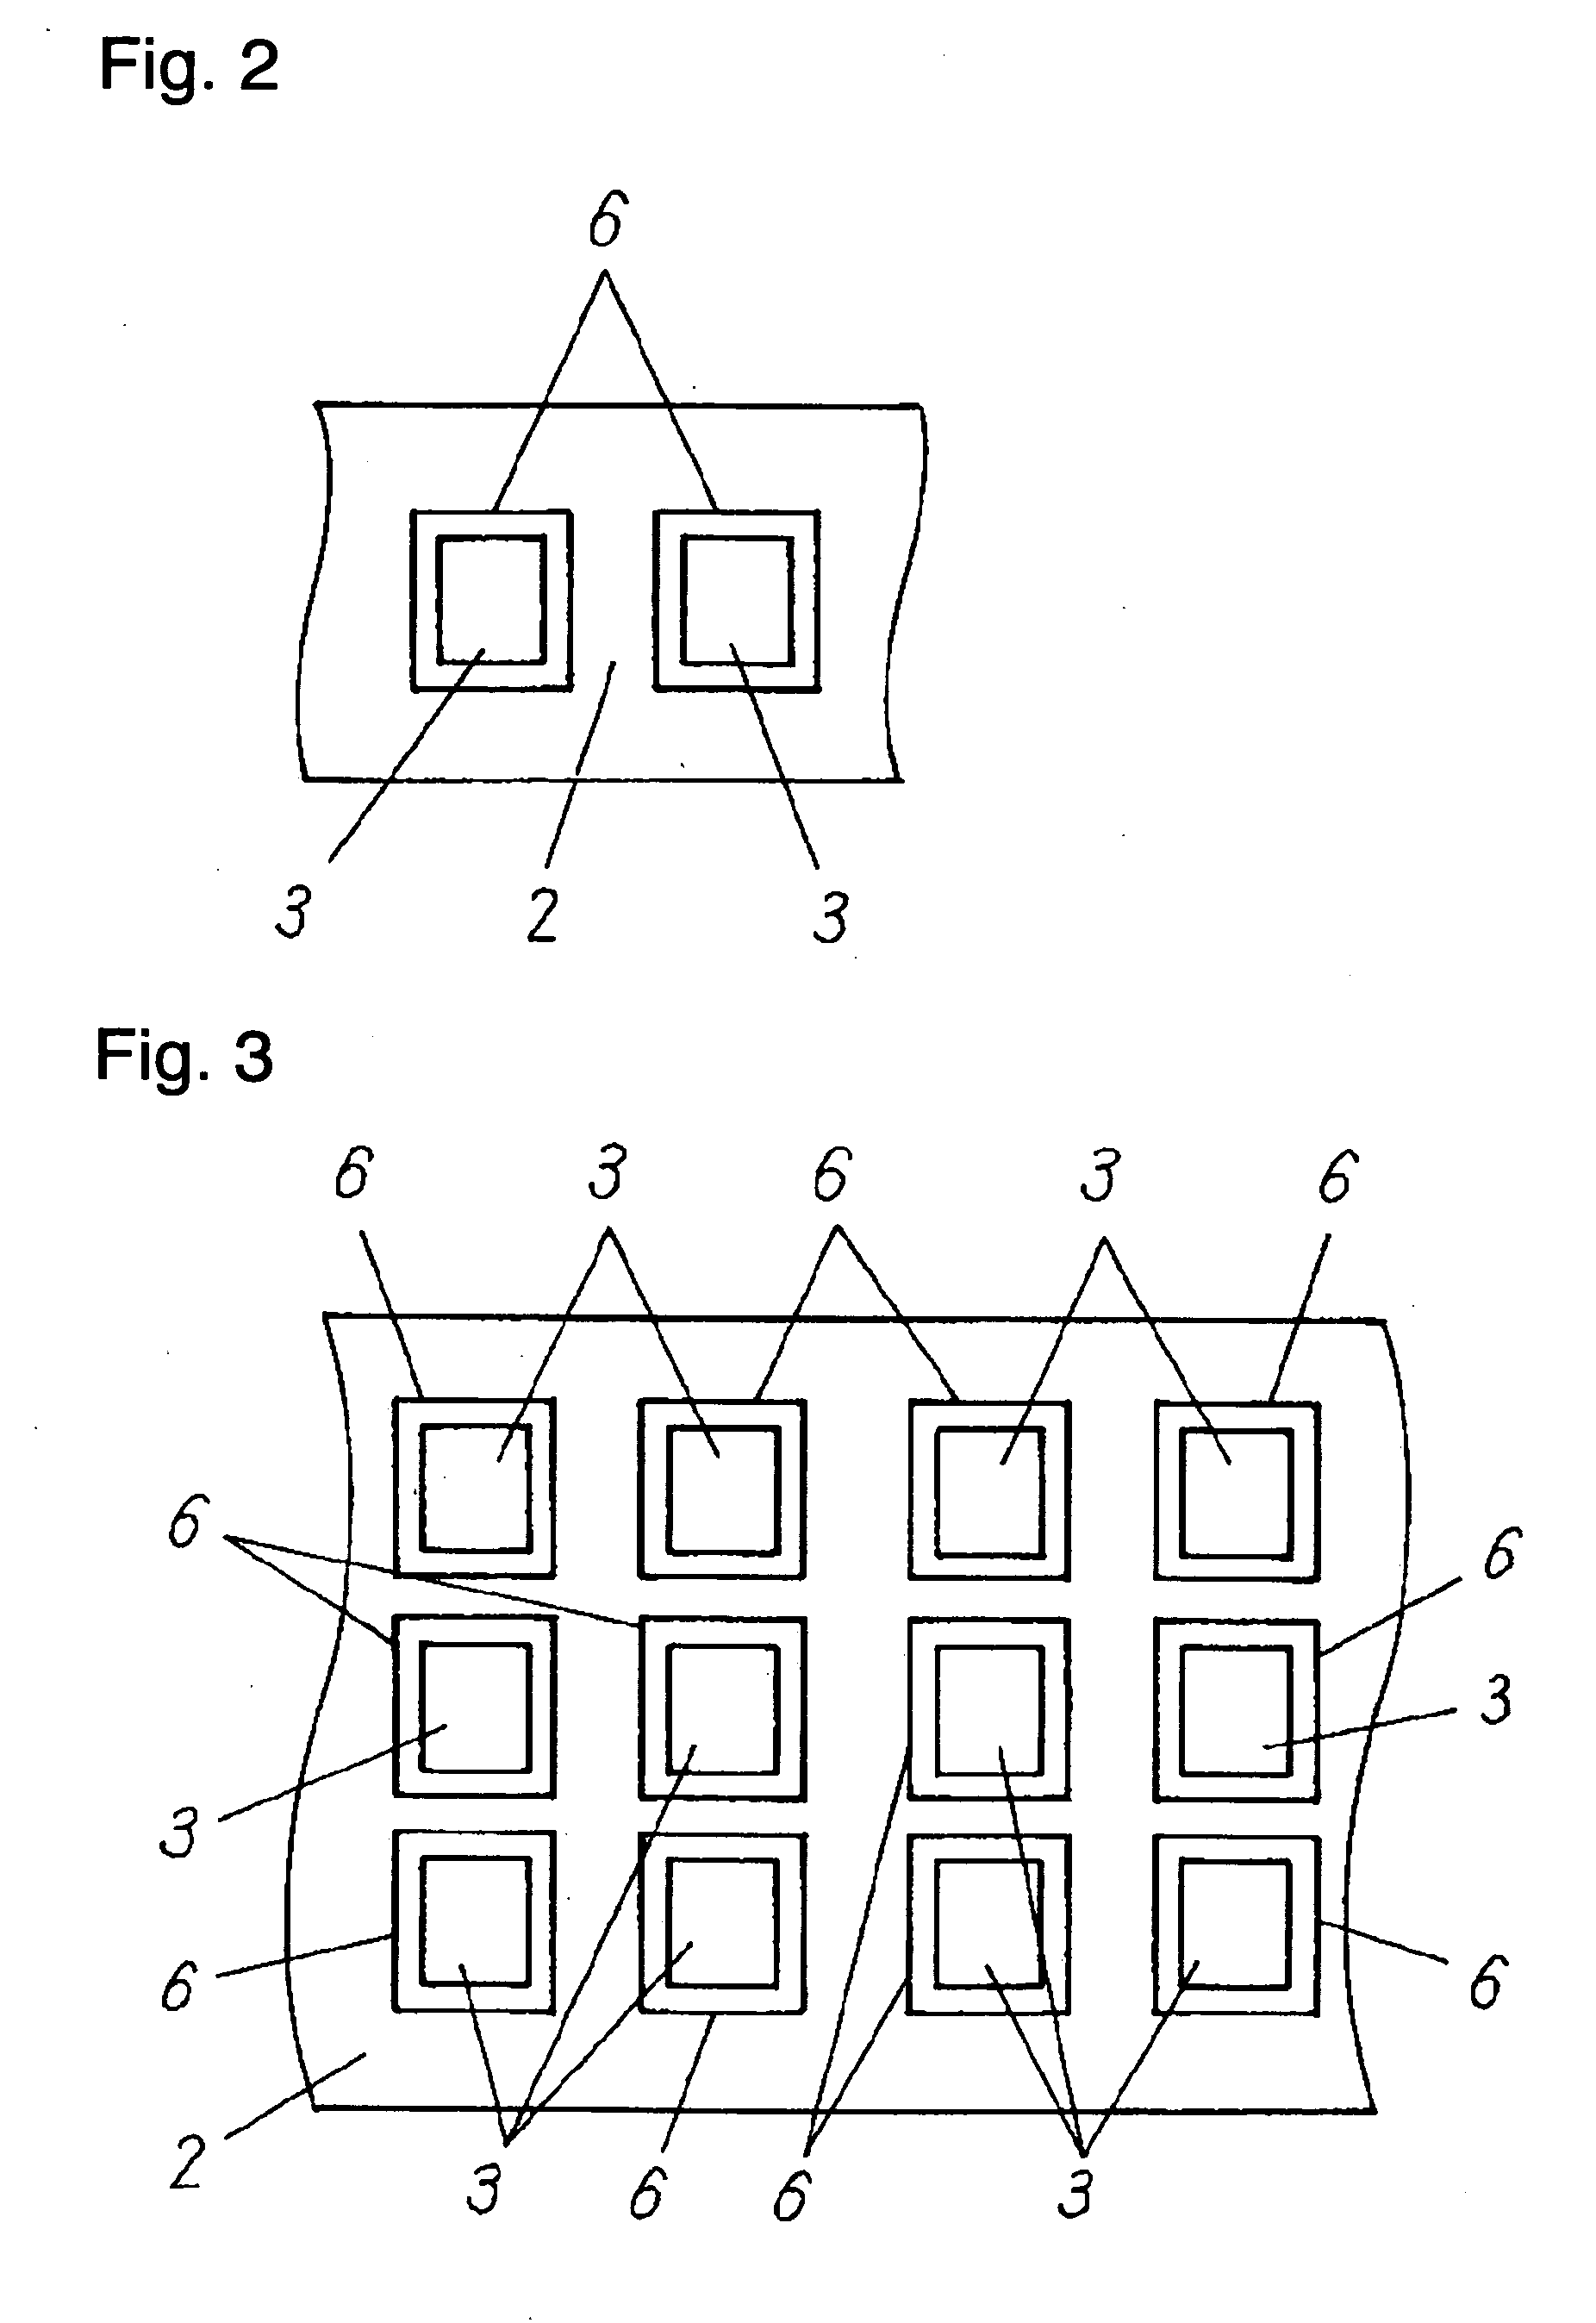 Electronic component-built-in module